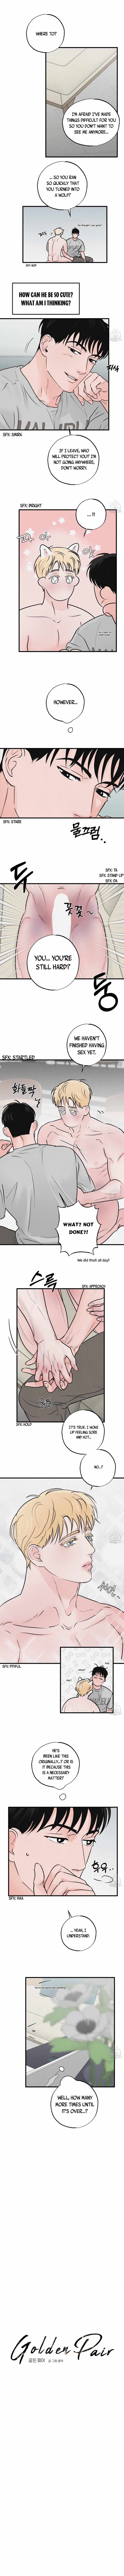 Golden Pair - Page 2